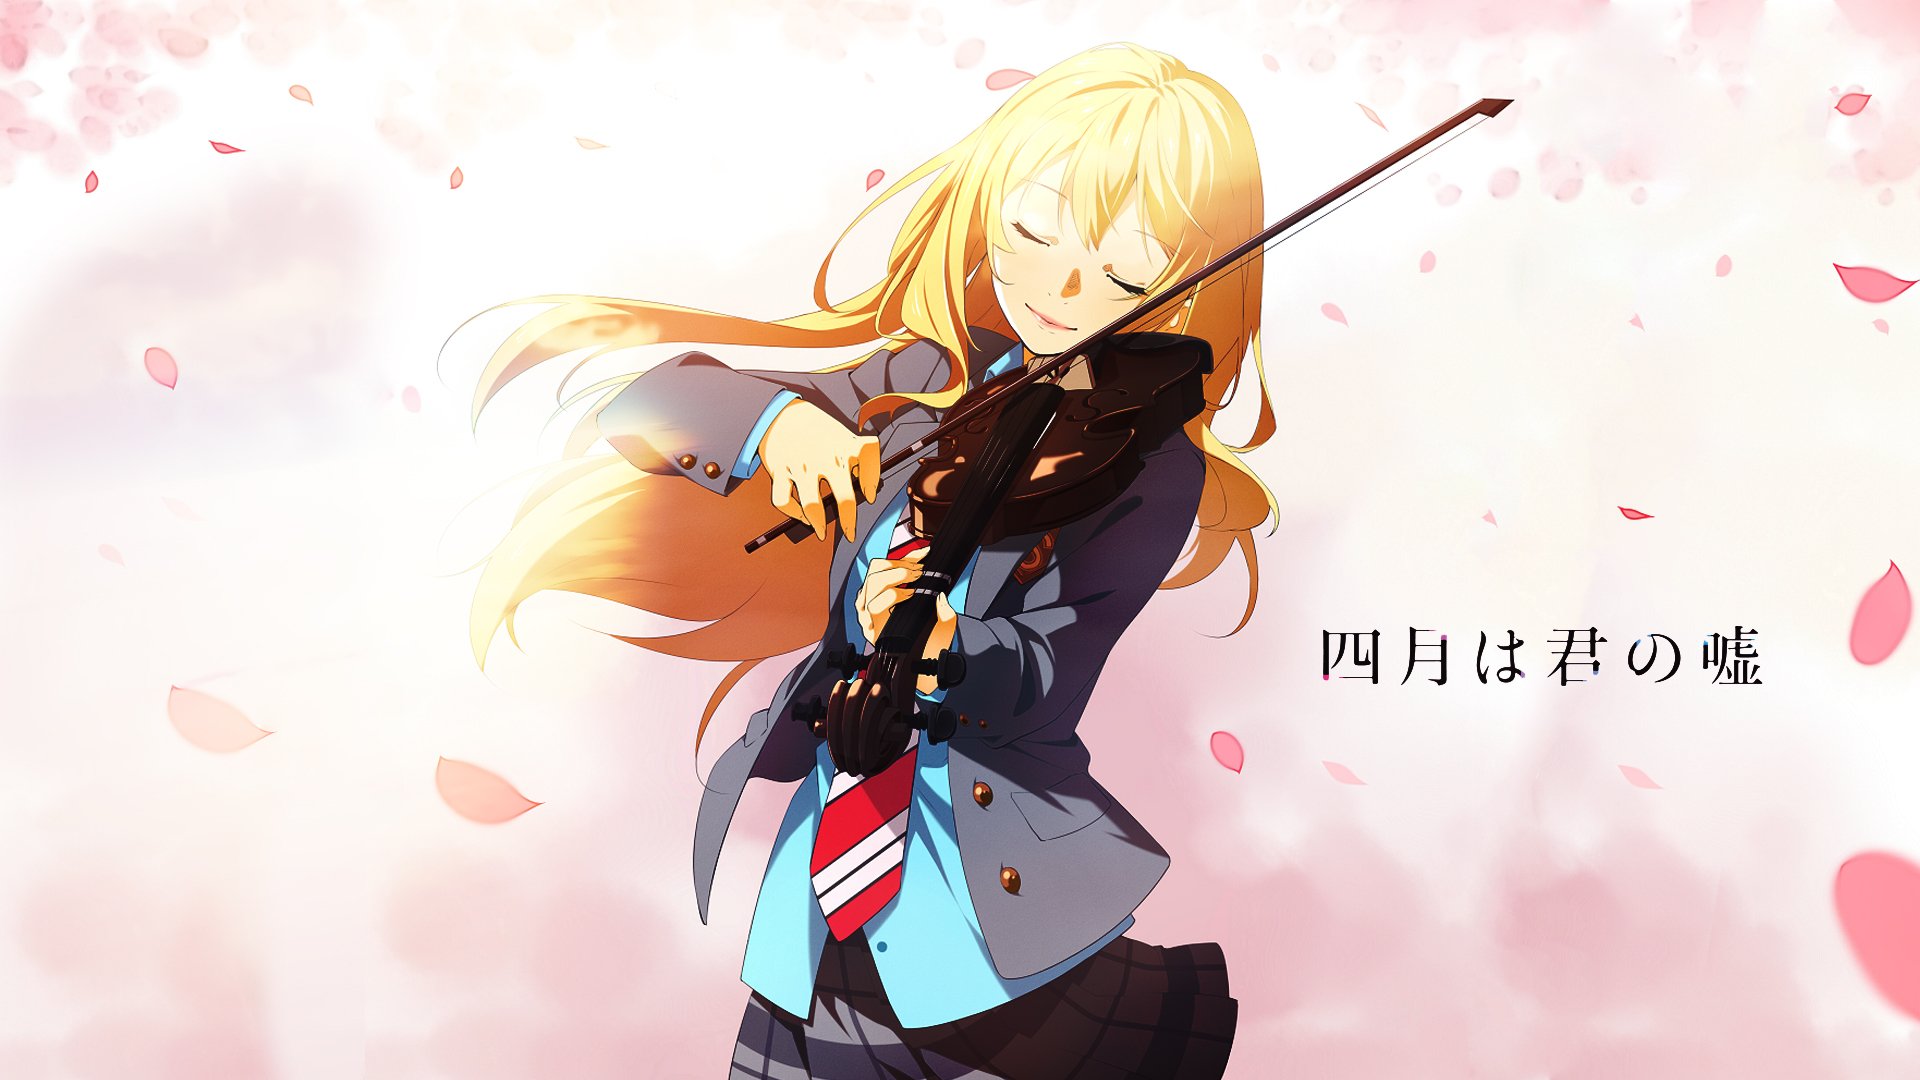 Your Lie in April Full HD Wallpaper and Background Image ...